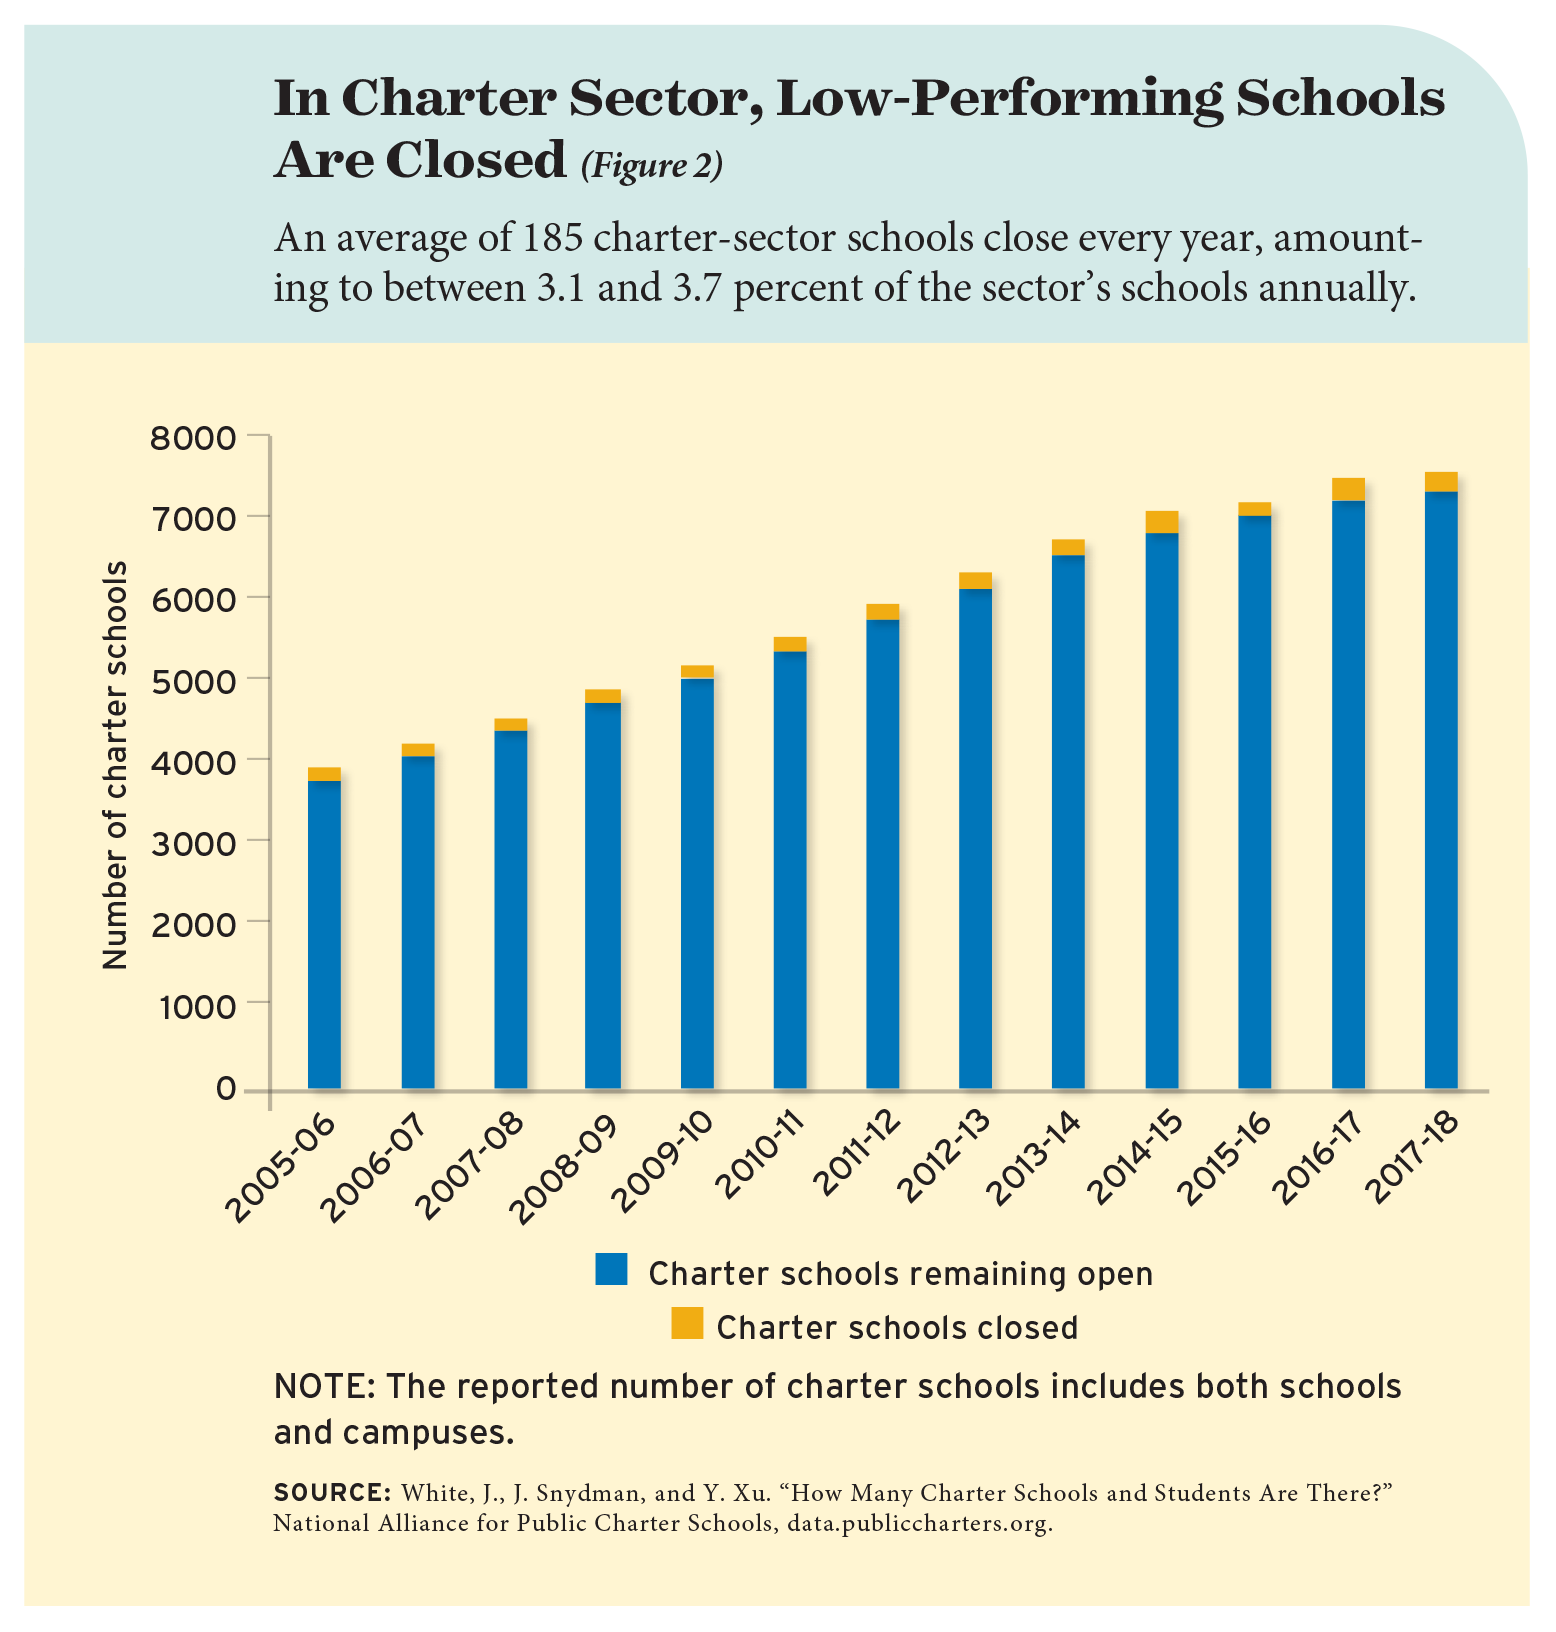 In Charter Sector, Low-Performing Schools Are Closed (Figure 2)